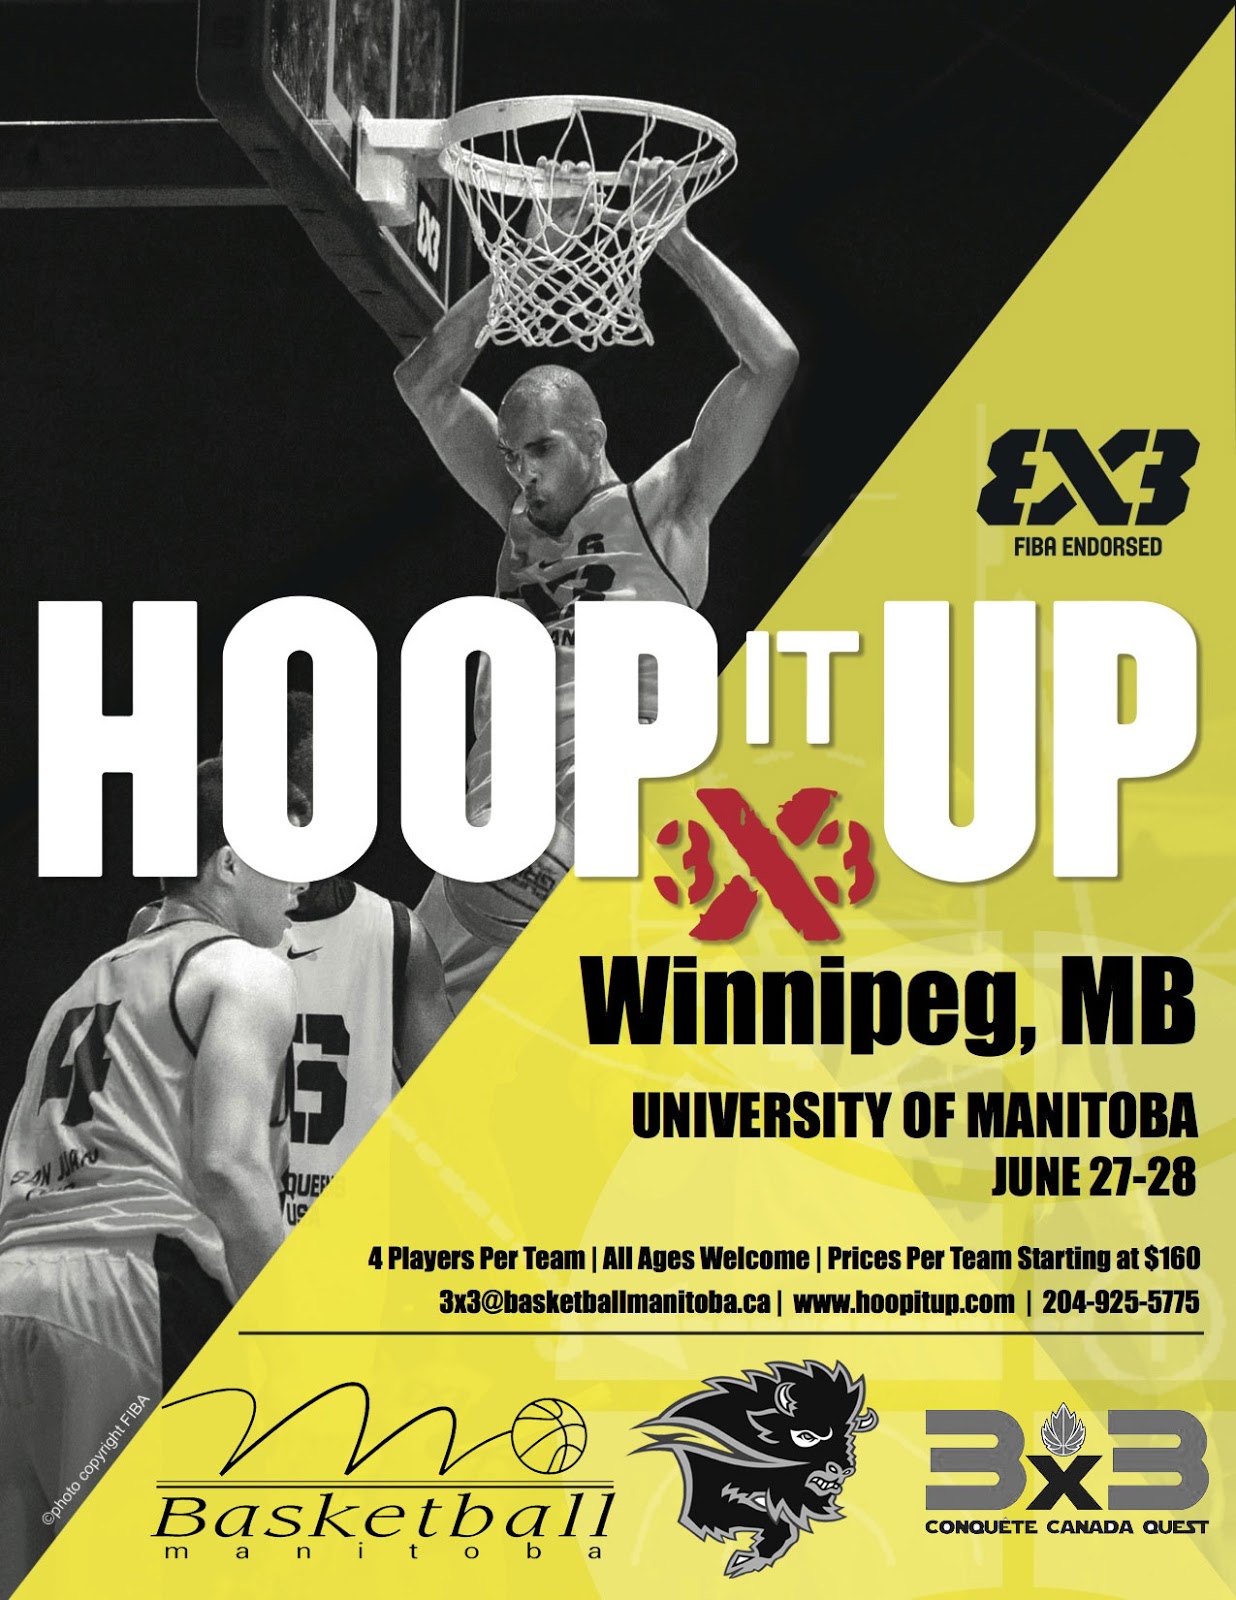 Hoop it Up 3X3 Returning to Winnipeg, June 27-28 at the University of  Manitoba - University of Manitoba Athletics